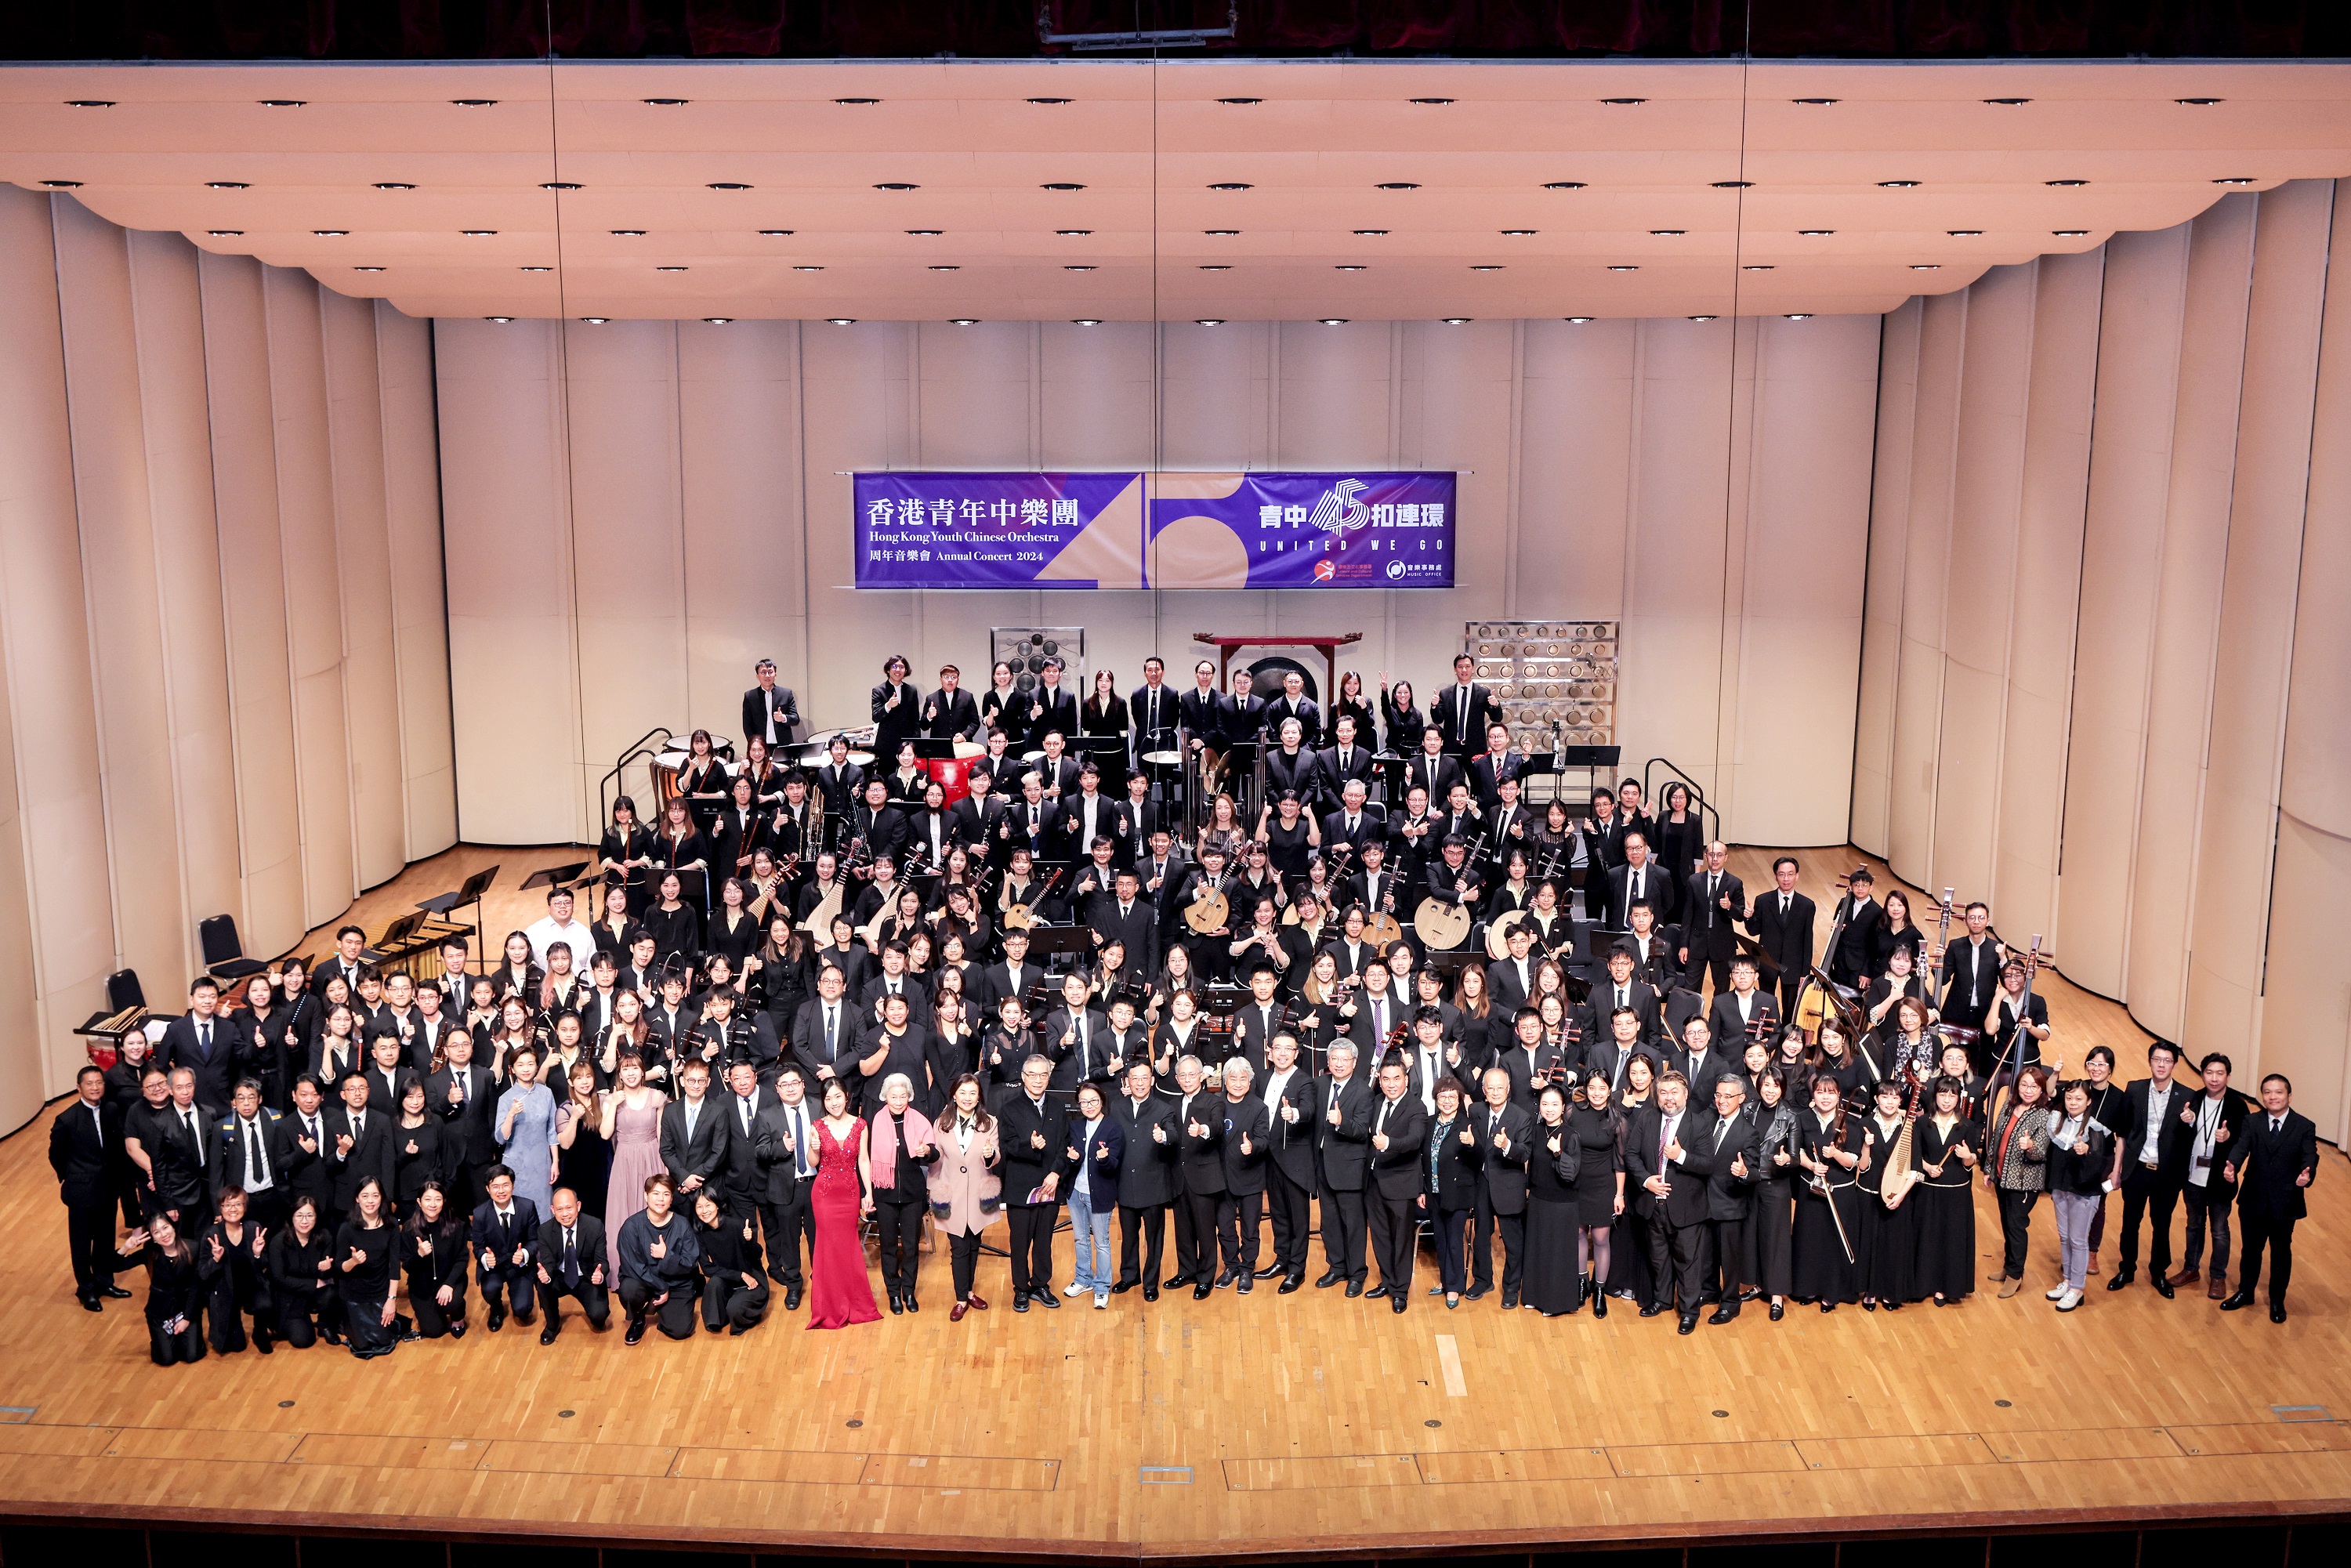 Hong Kong Youth Chinese Orchestra Annual Concert “United We Go”